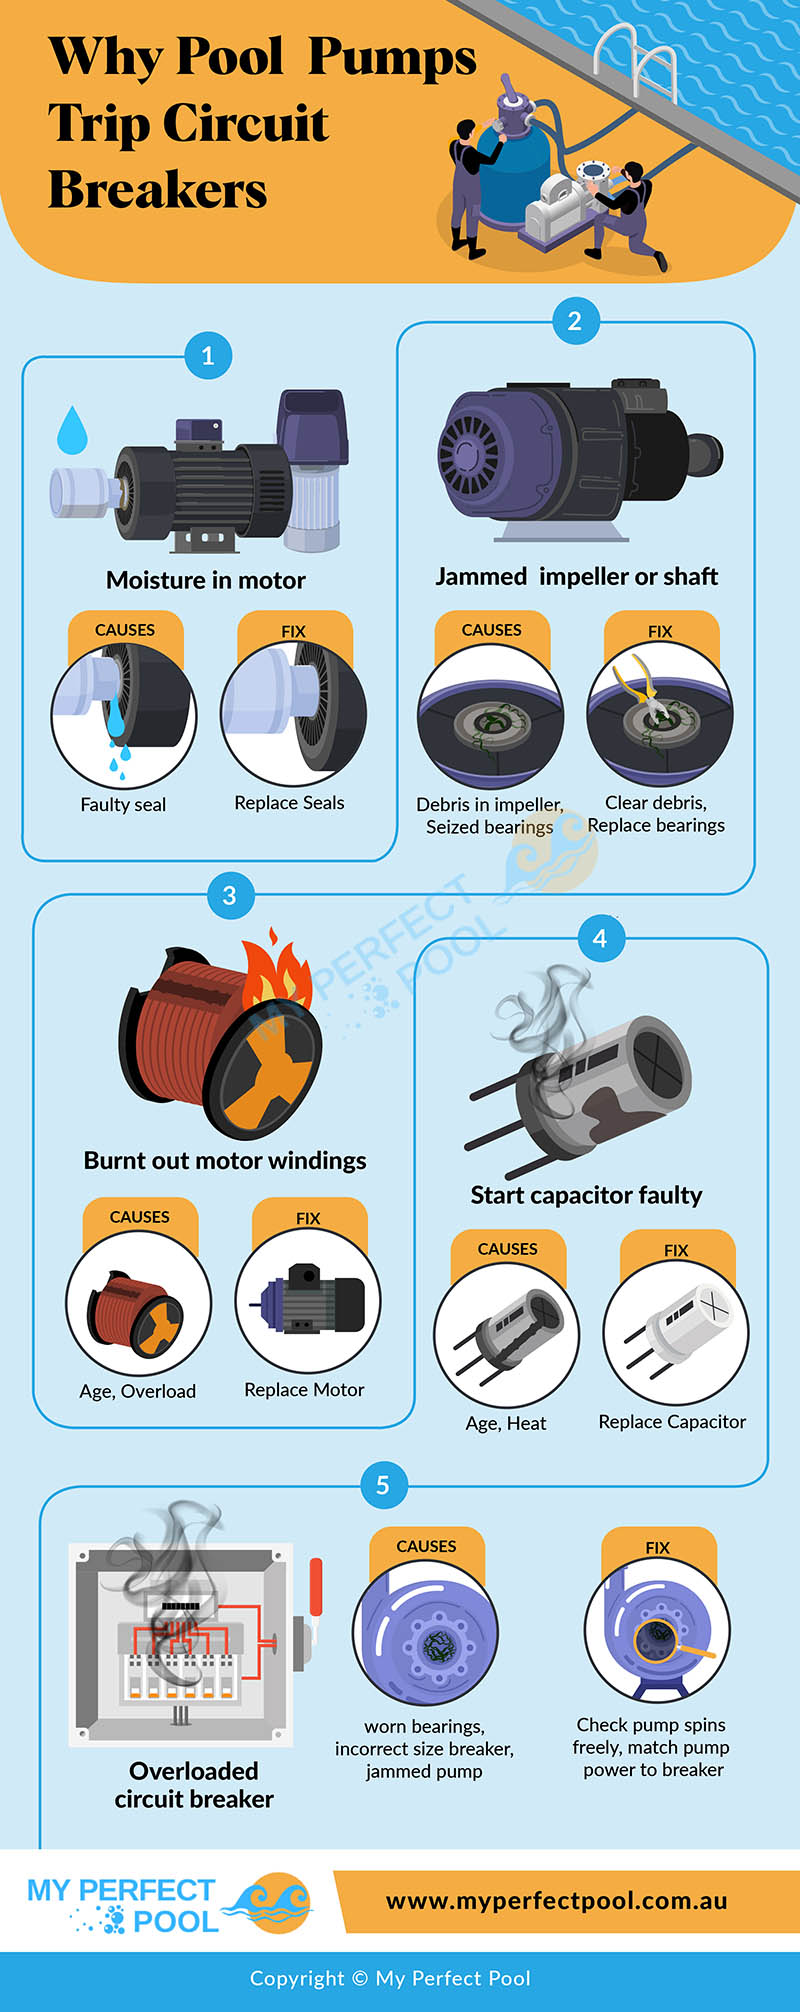 Infographic showing the top reasons pool pumps repeatably trip circuit breakers.